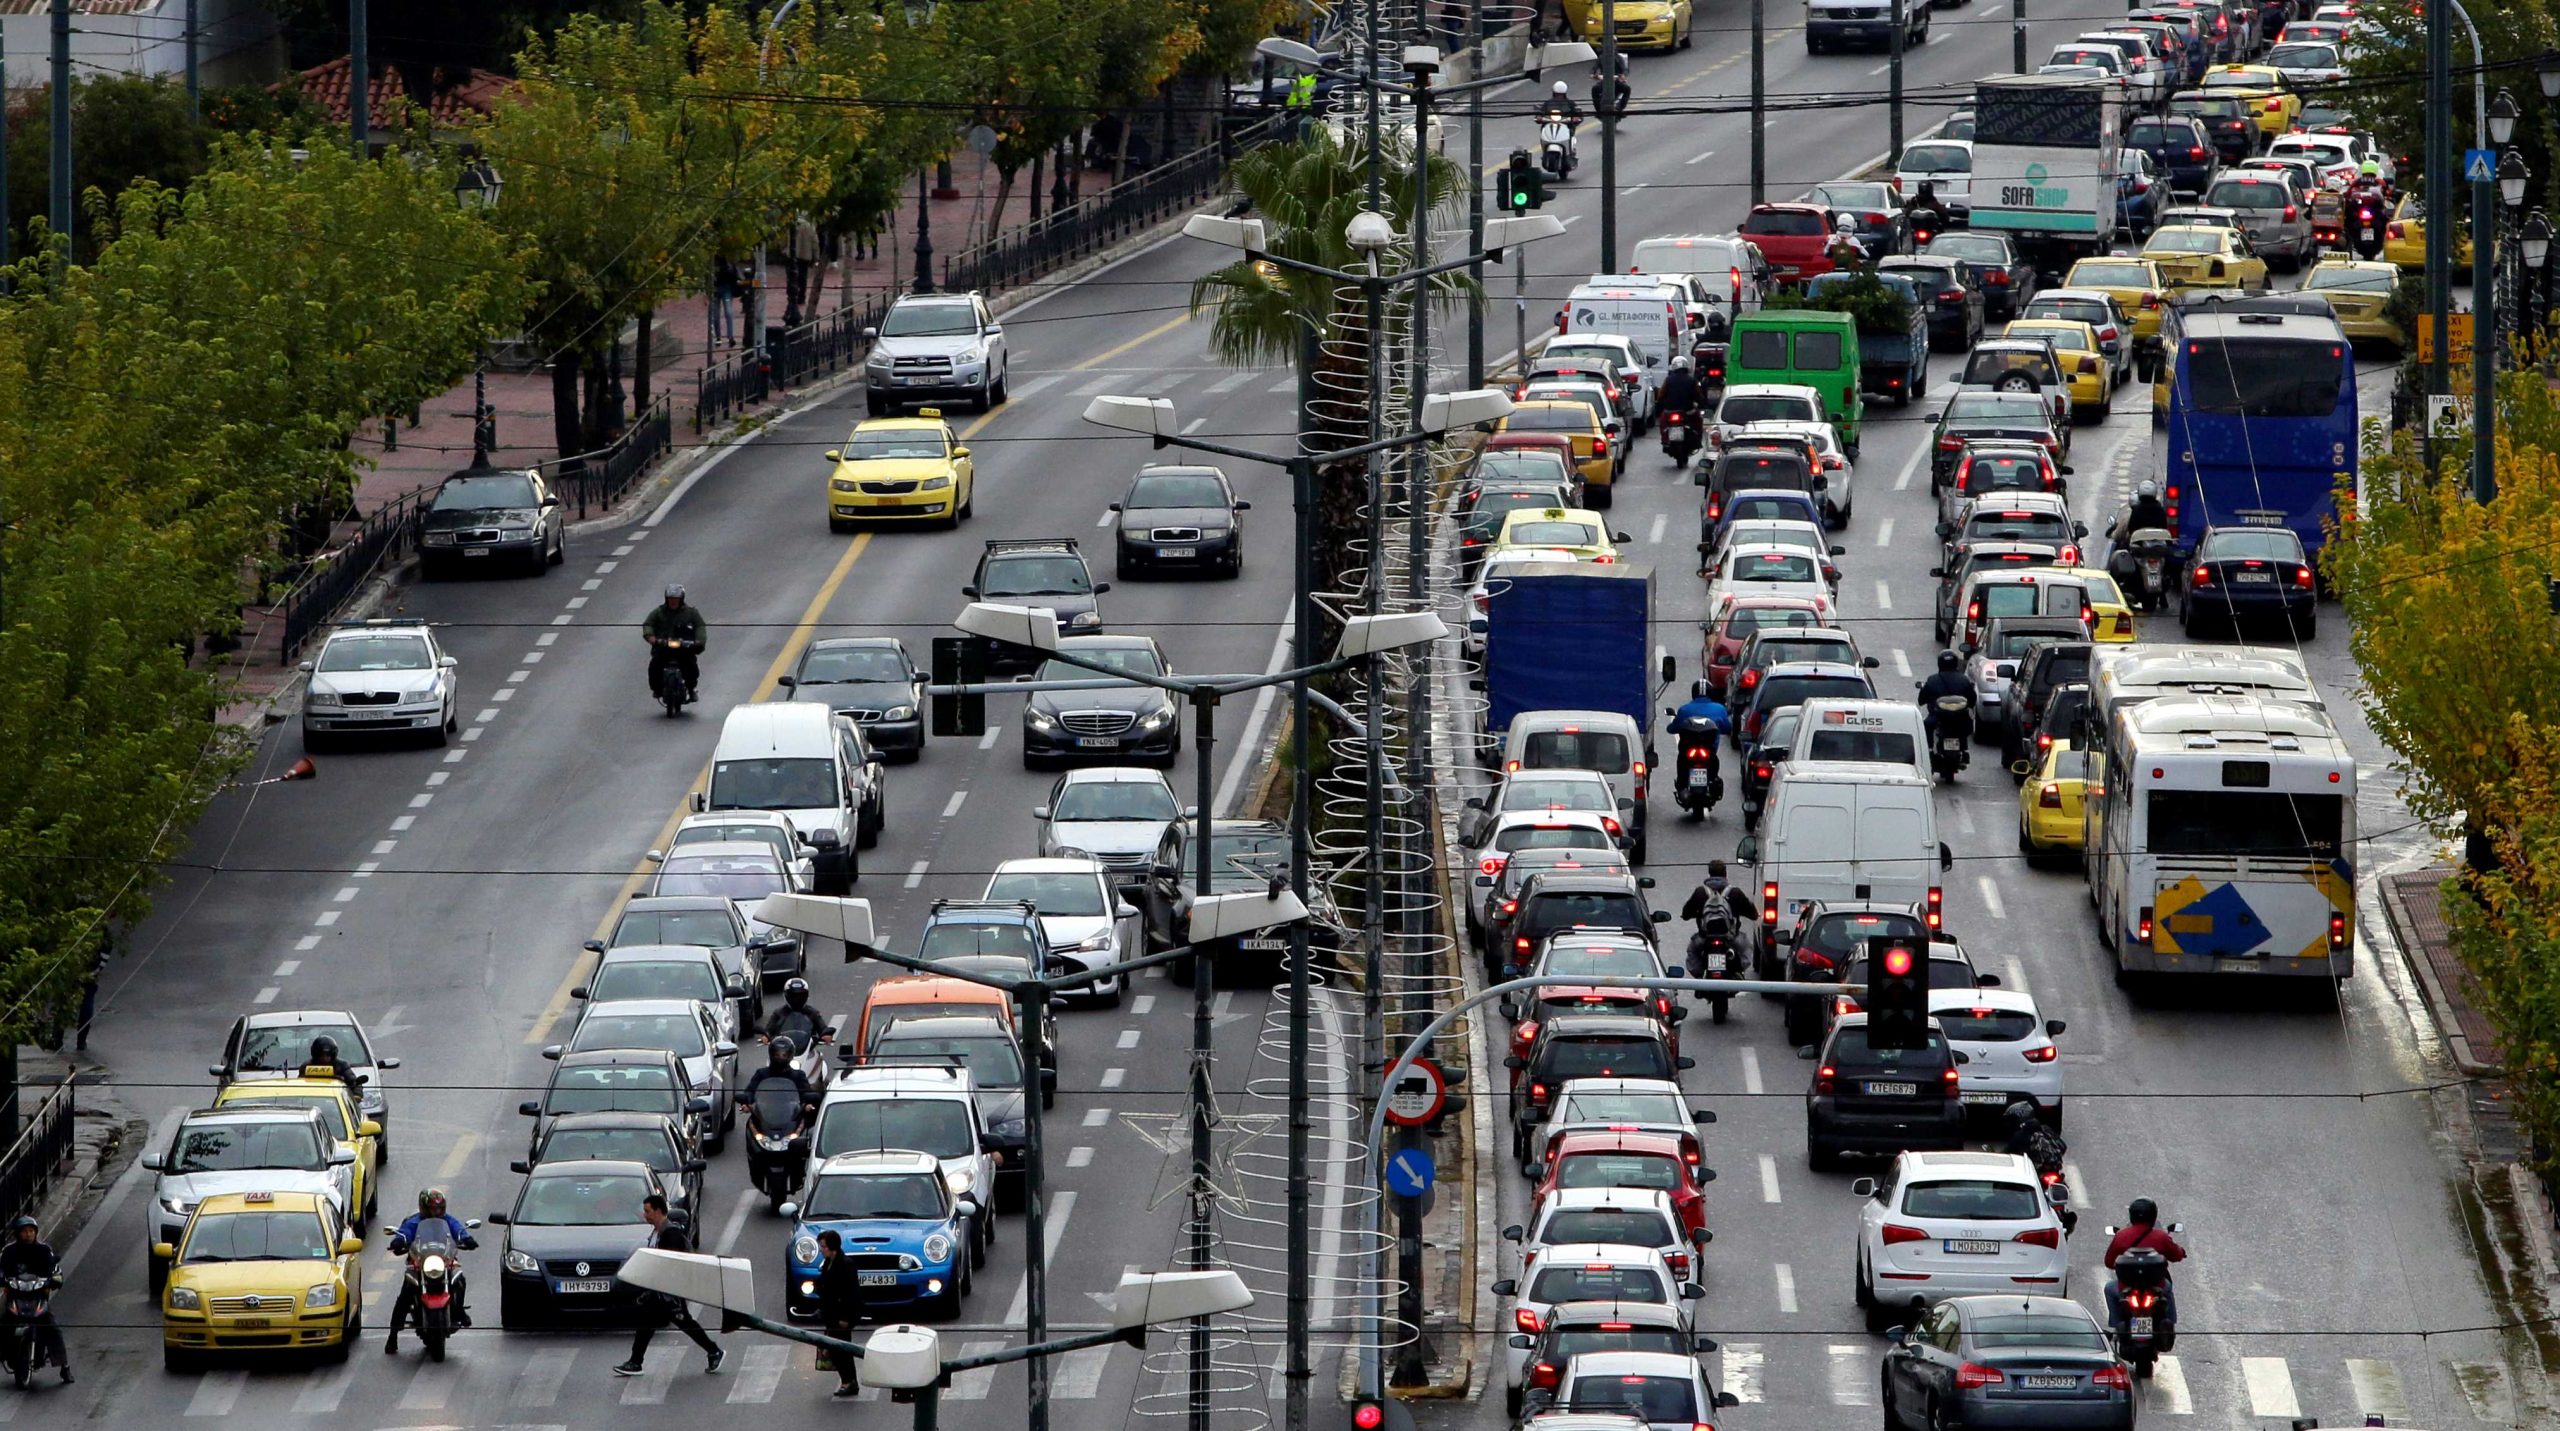 Greek Road Tax Fees Deadline Possibly Extended, Minister Says